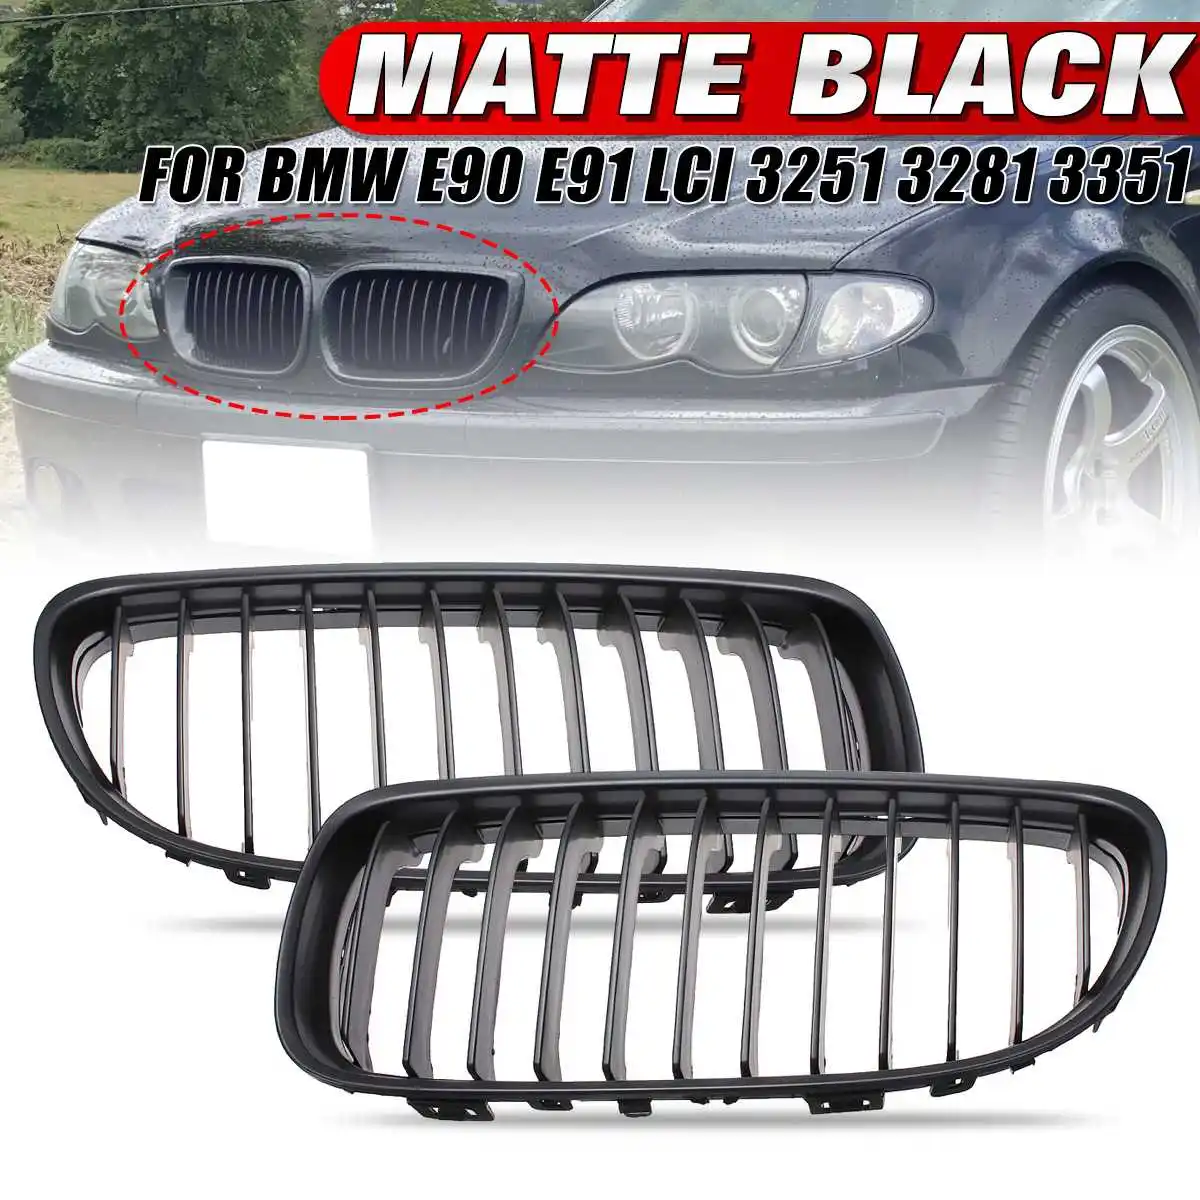 Matte Black Front Sport Kidney Grille Grill For BMW E90 E91 LCT 3-Serise Sedan 2009 2010 2011 2012 2013 Car Racing Grills